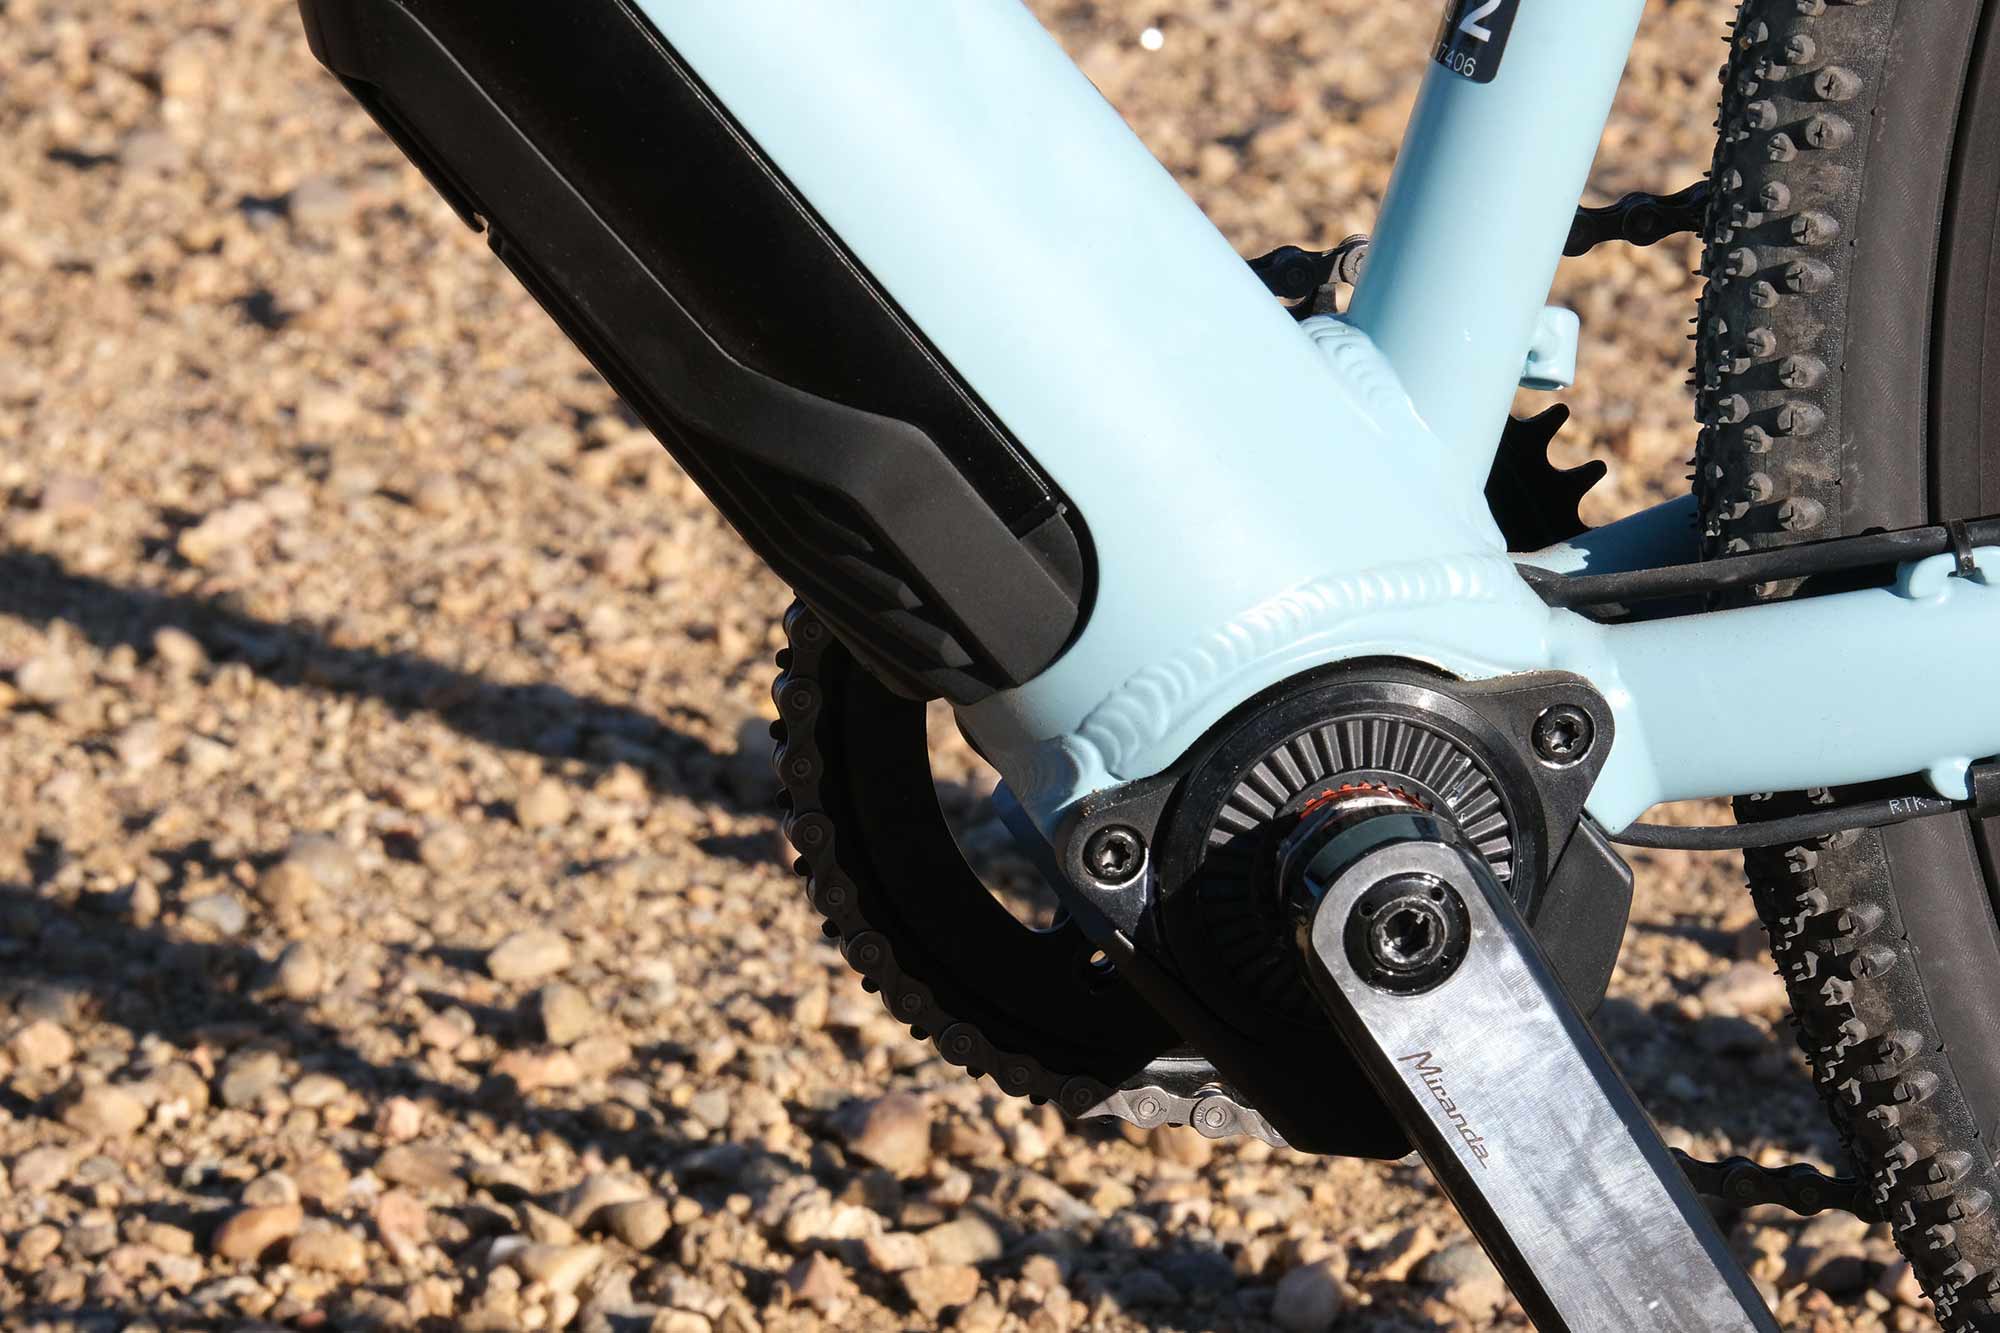 The Fazua Ride 50 Street drive system hides covertly inside the Gravital Risbar’s aluminum frame.